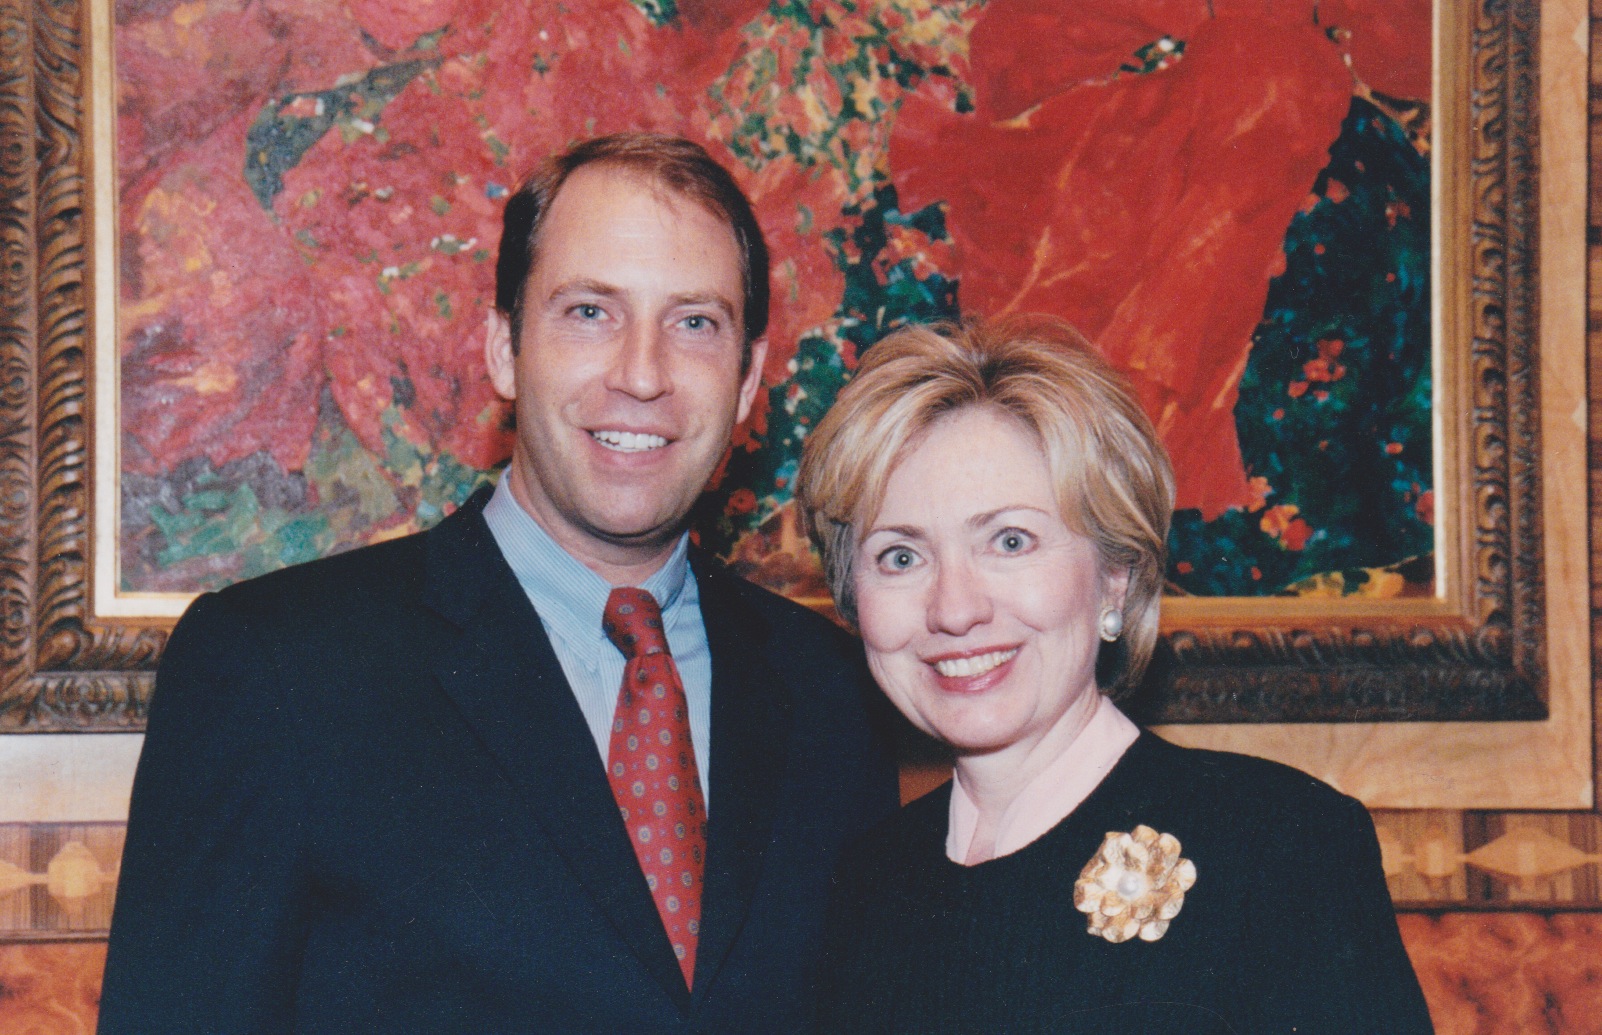 Henri M. Kessler with Hillary Rodham Clinton at The Russian Tea Room, NYC 2000